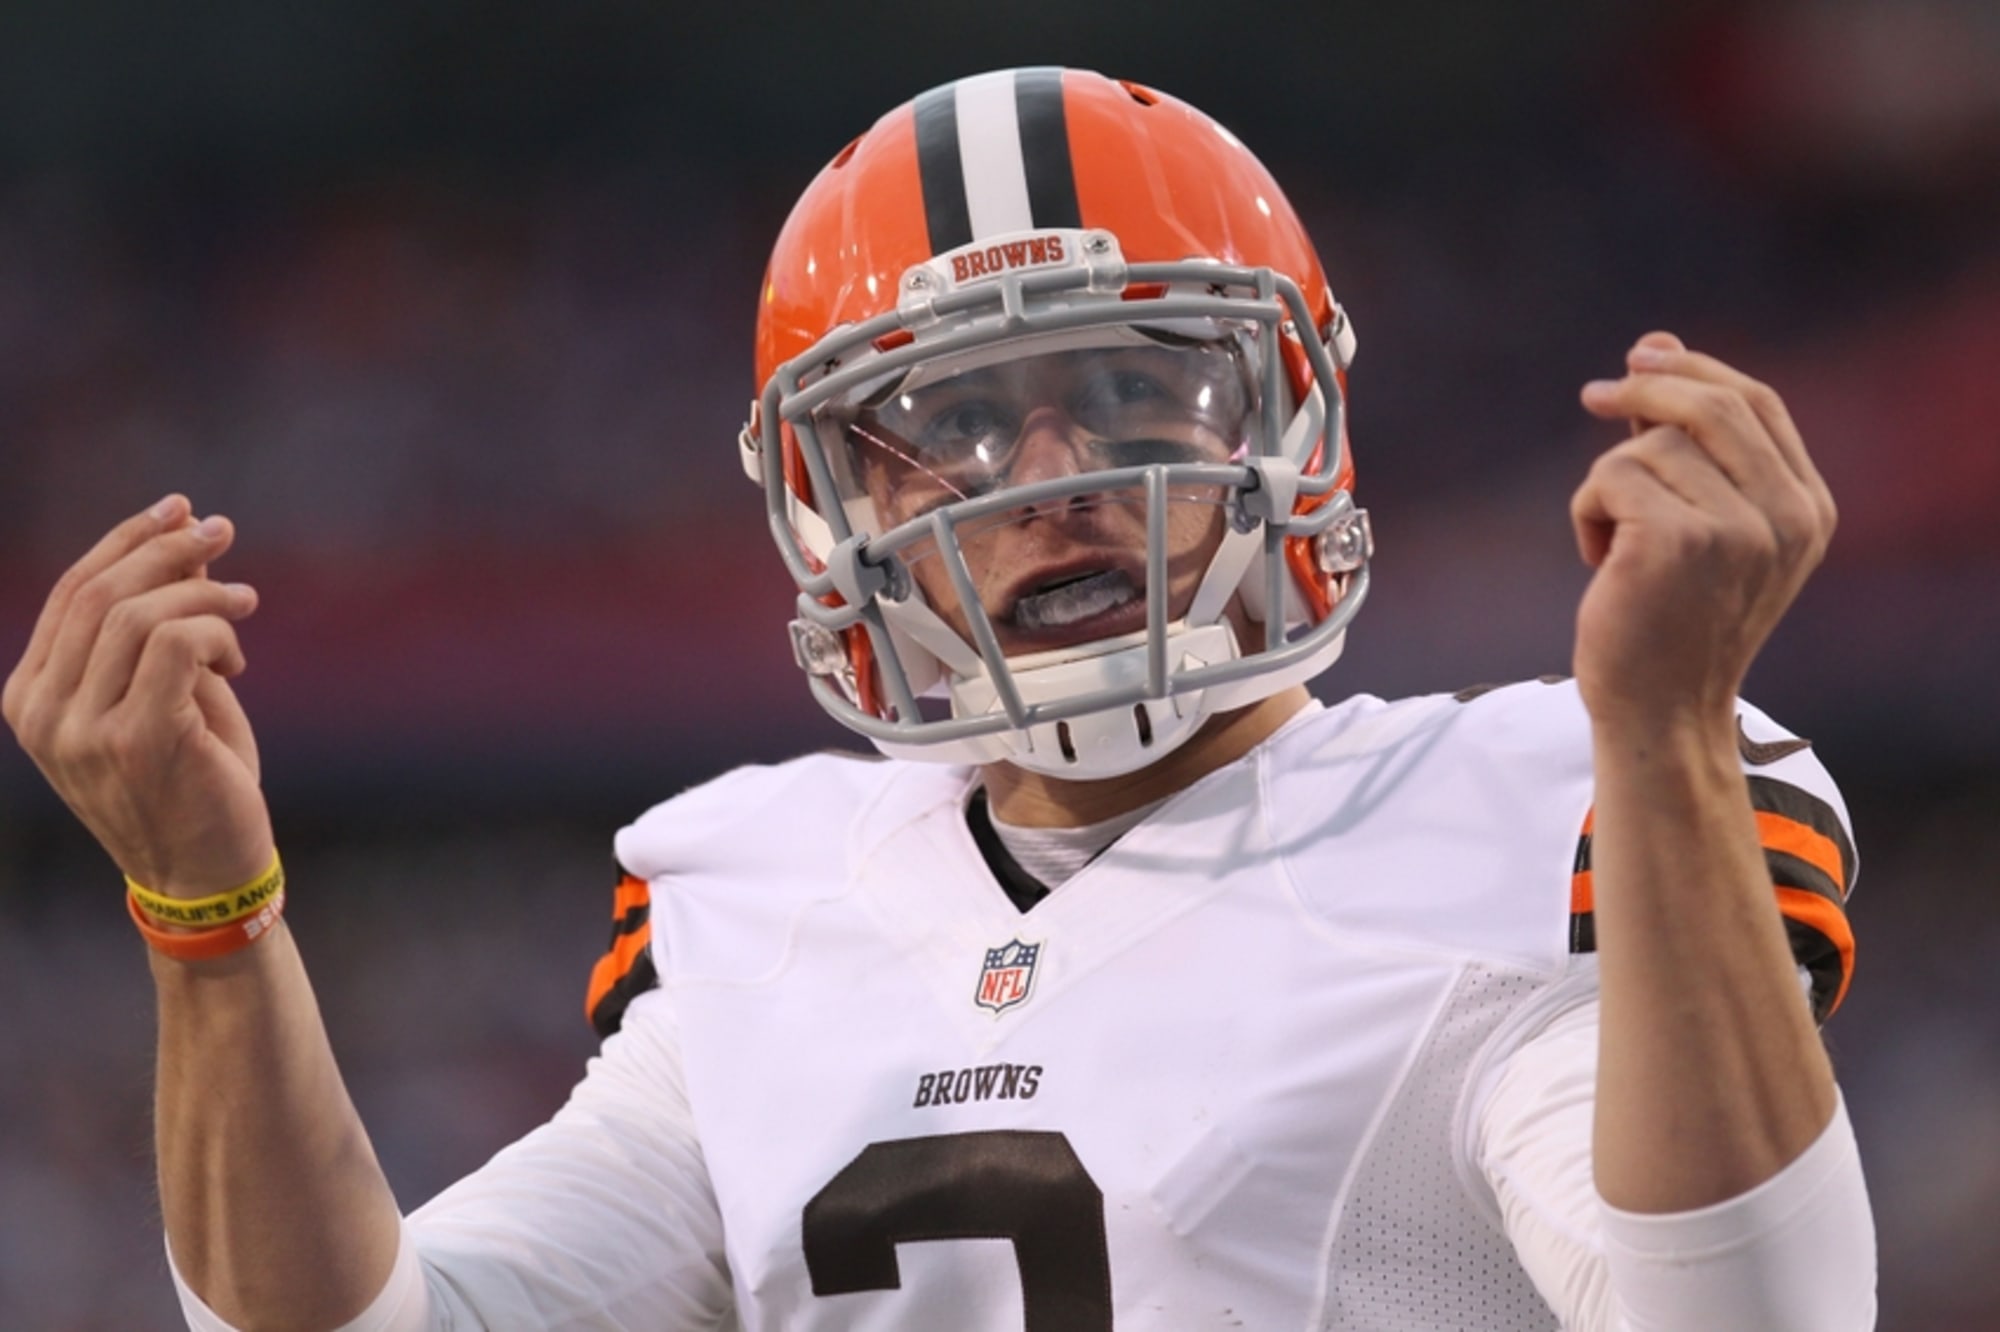 No One Wants To Buy A Johnny Manziel Jersey Anymore